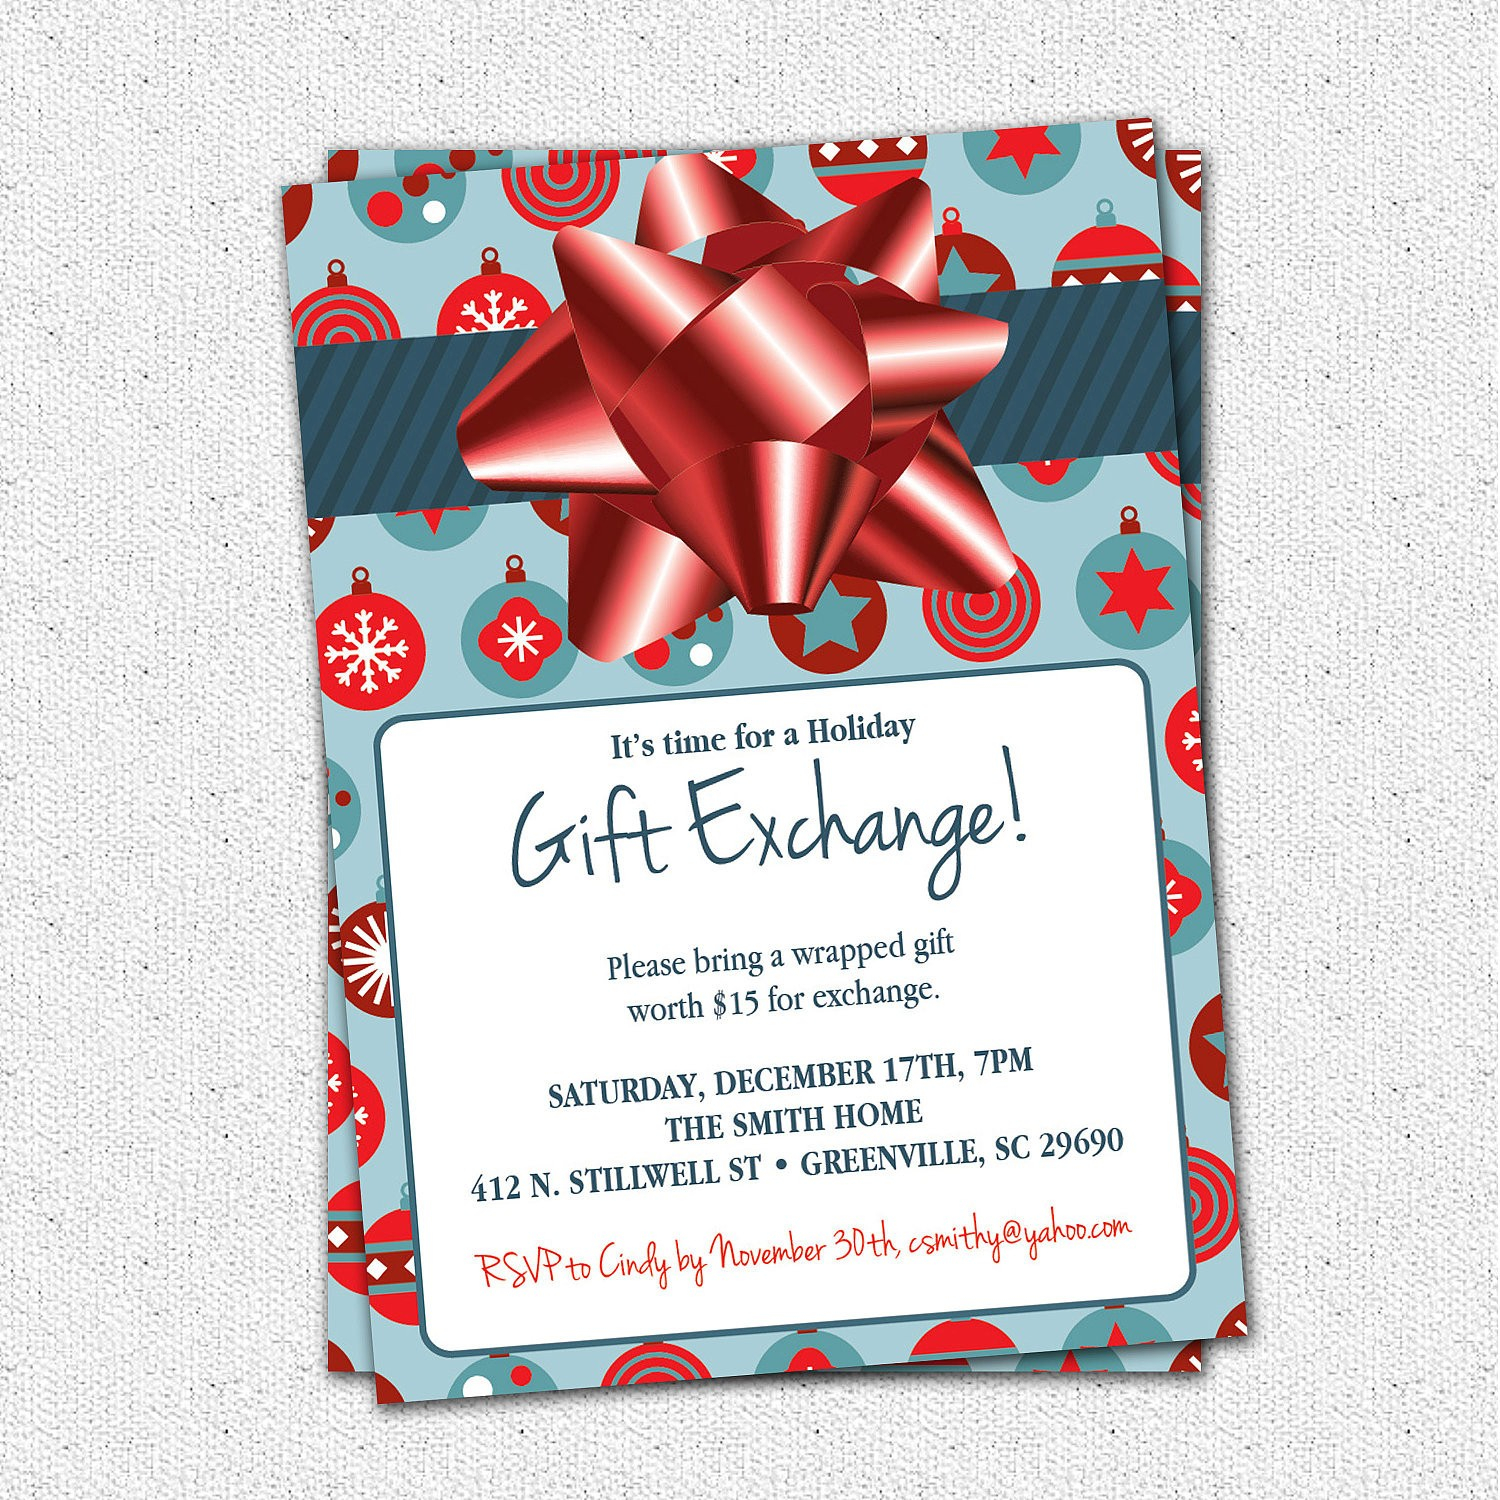 Christmas Photos Of White Elephant Gift Exchange Invitation Template intended for measurements 1500 X 1500